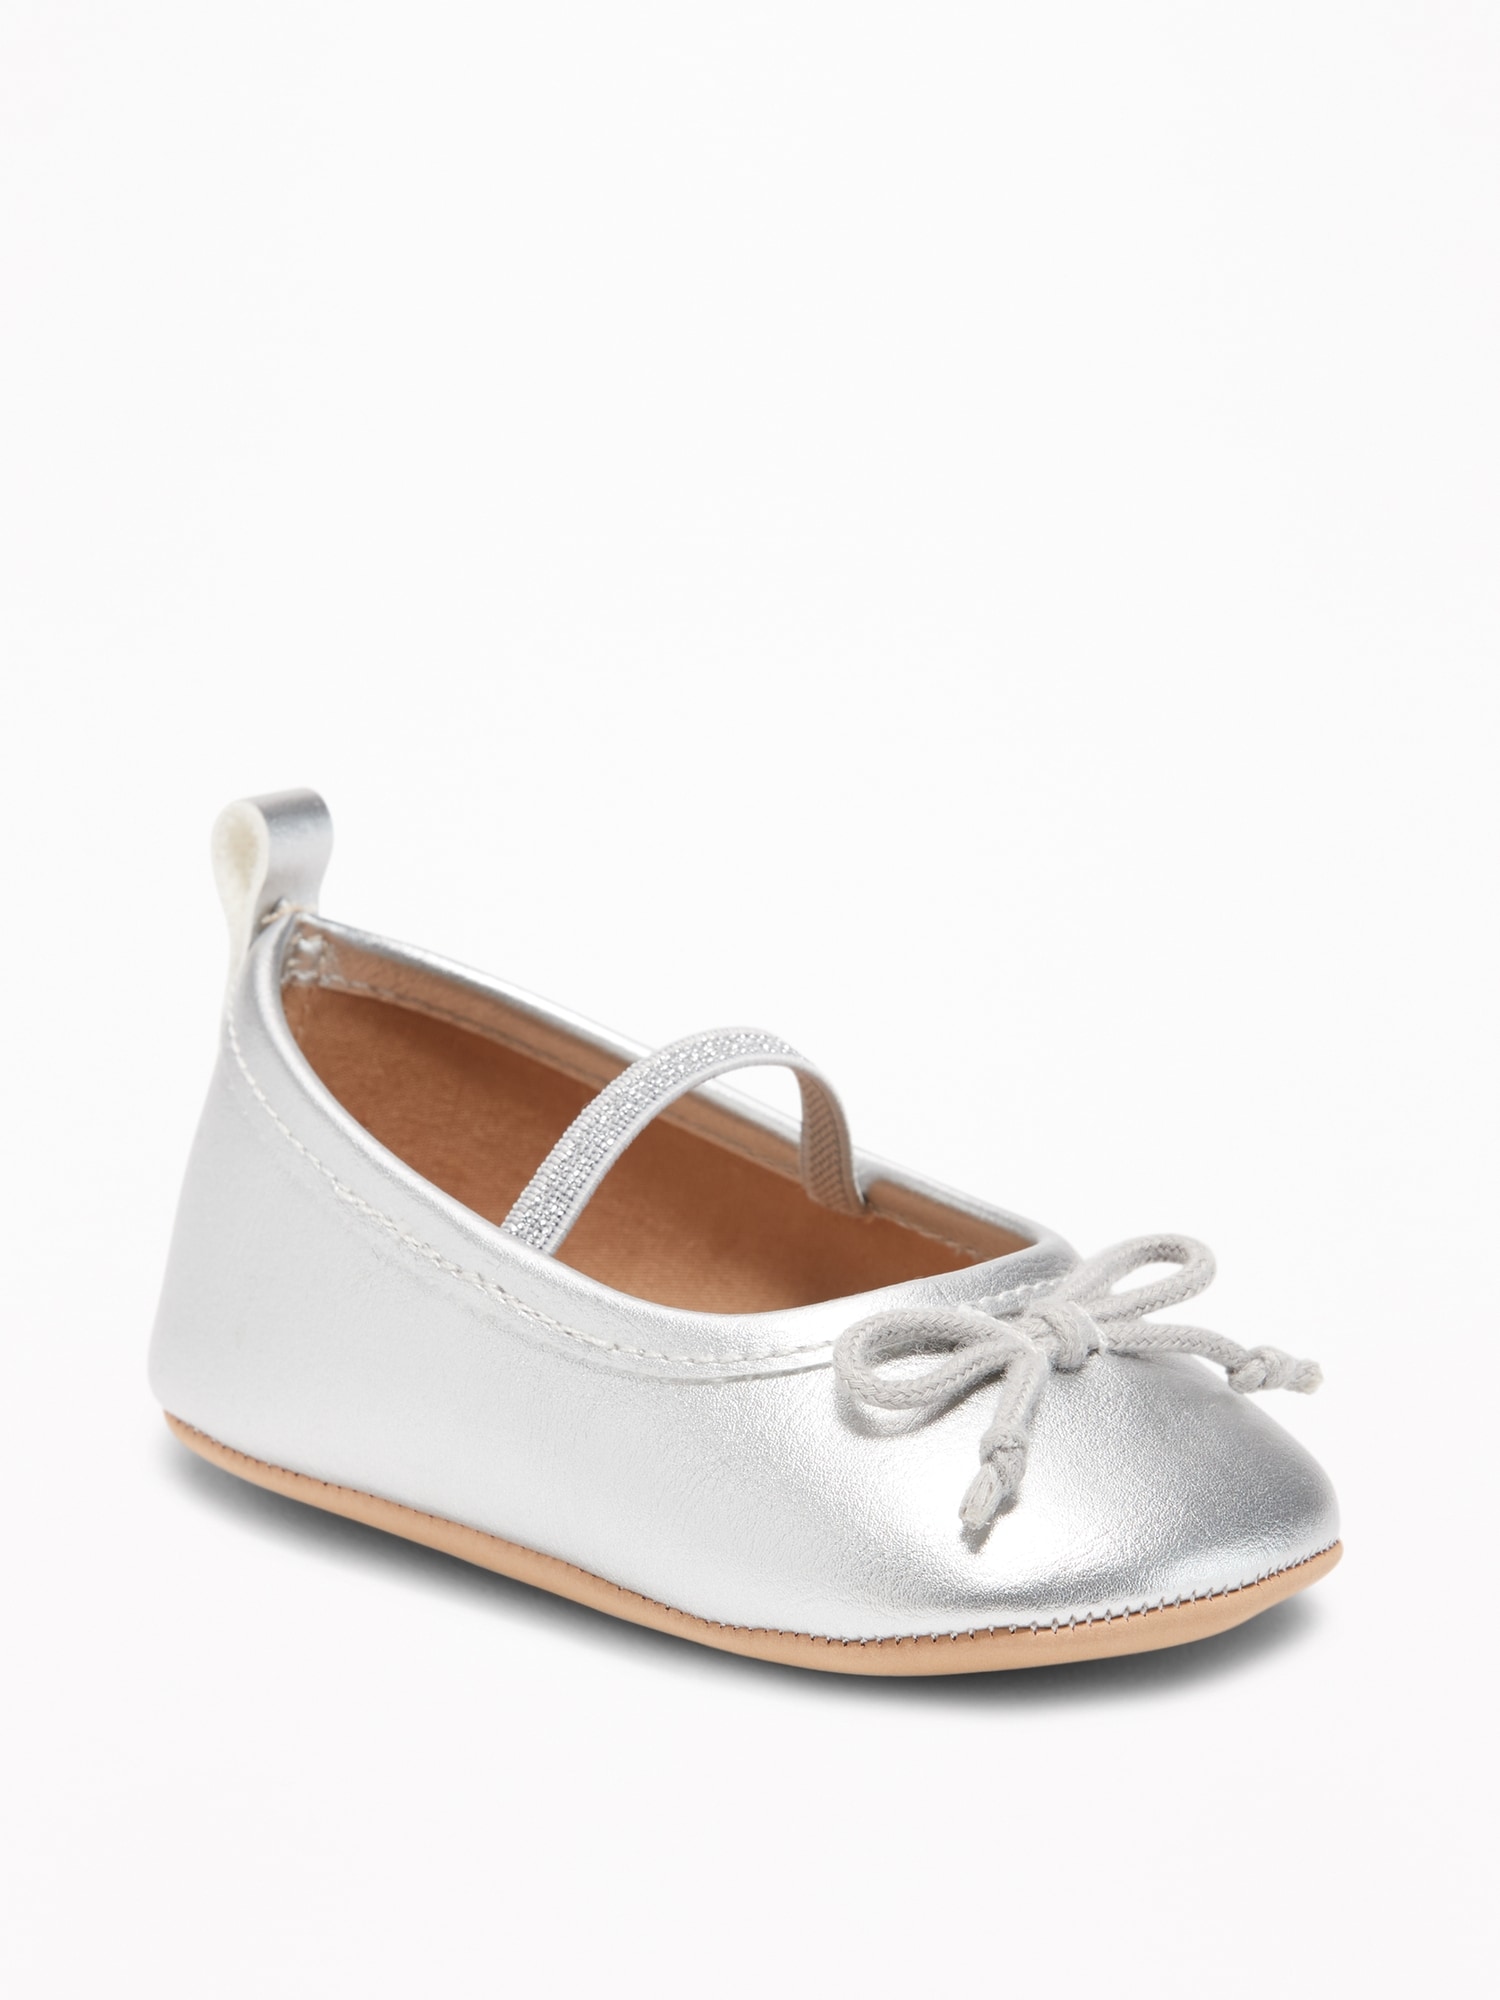 Metallic Faux-Leather Ballet Flats for Baby | Old Navy